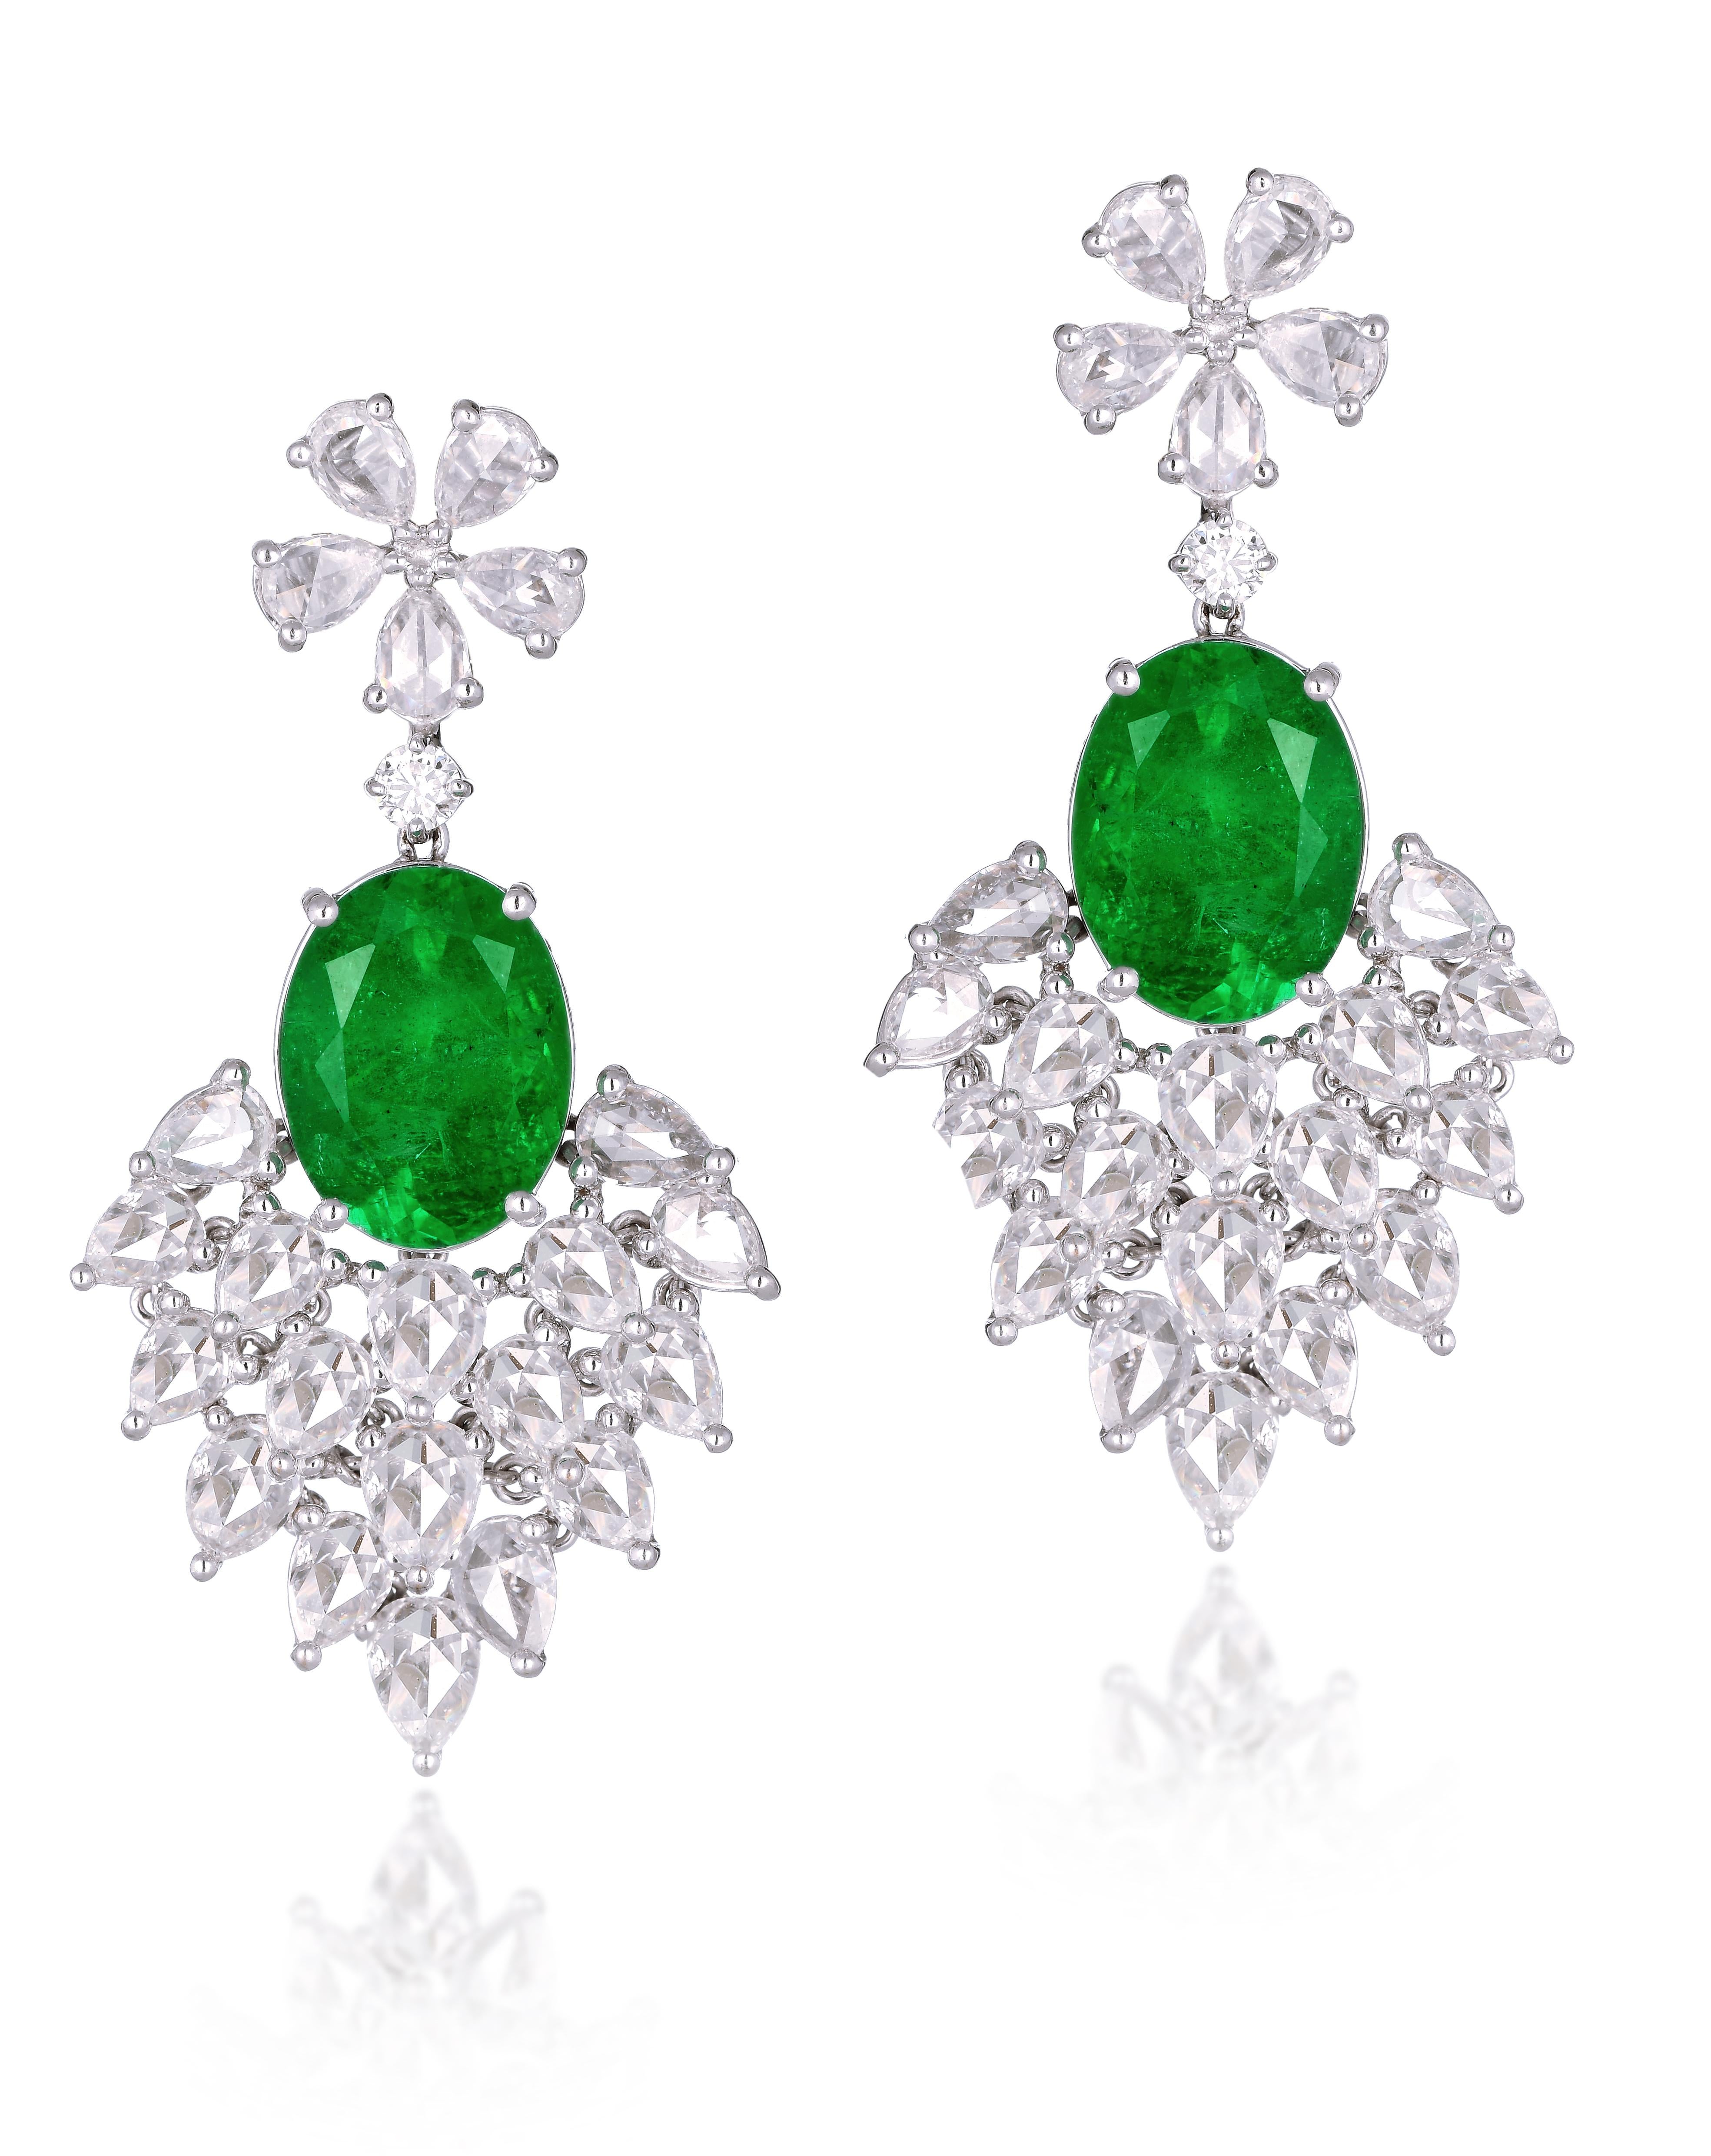 10.69 Carat Columbian Emerald Earrings with 8.3 Carat Diamonds In New Condition For Sale In Mumbai, Maharashtra